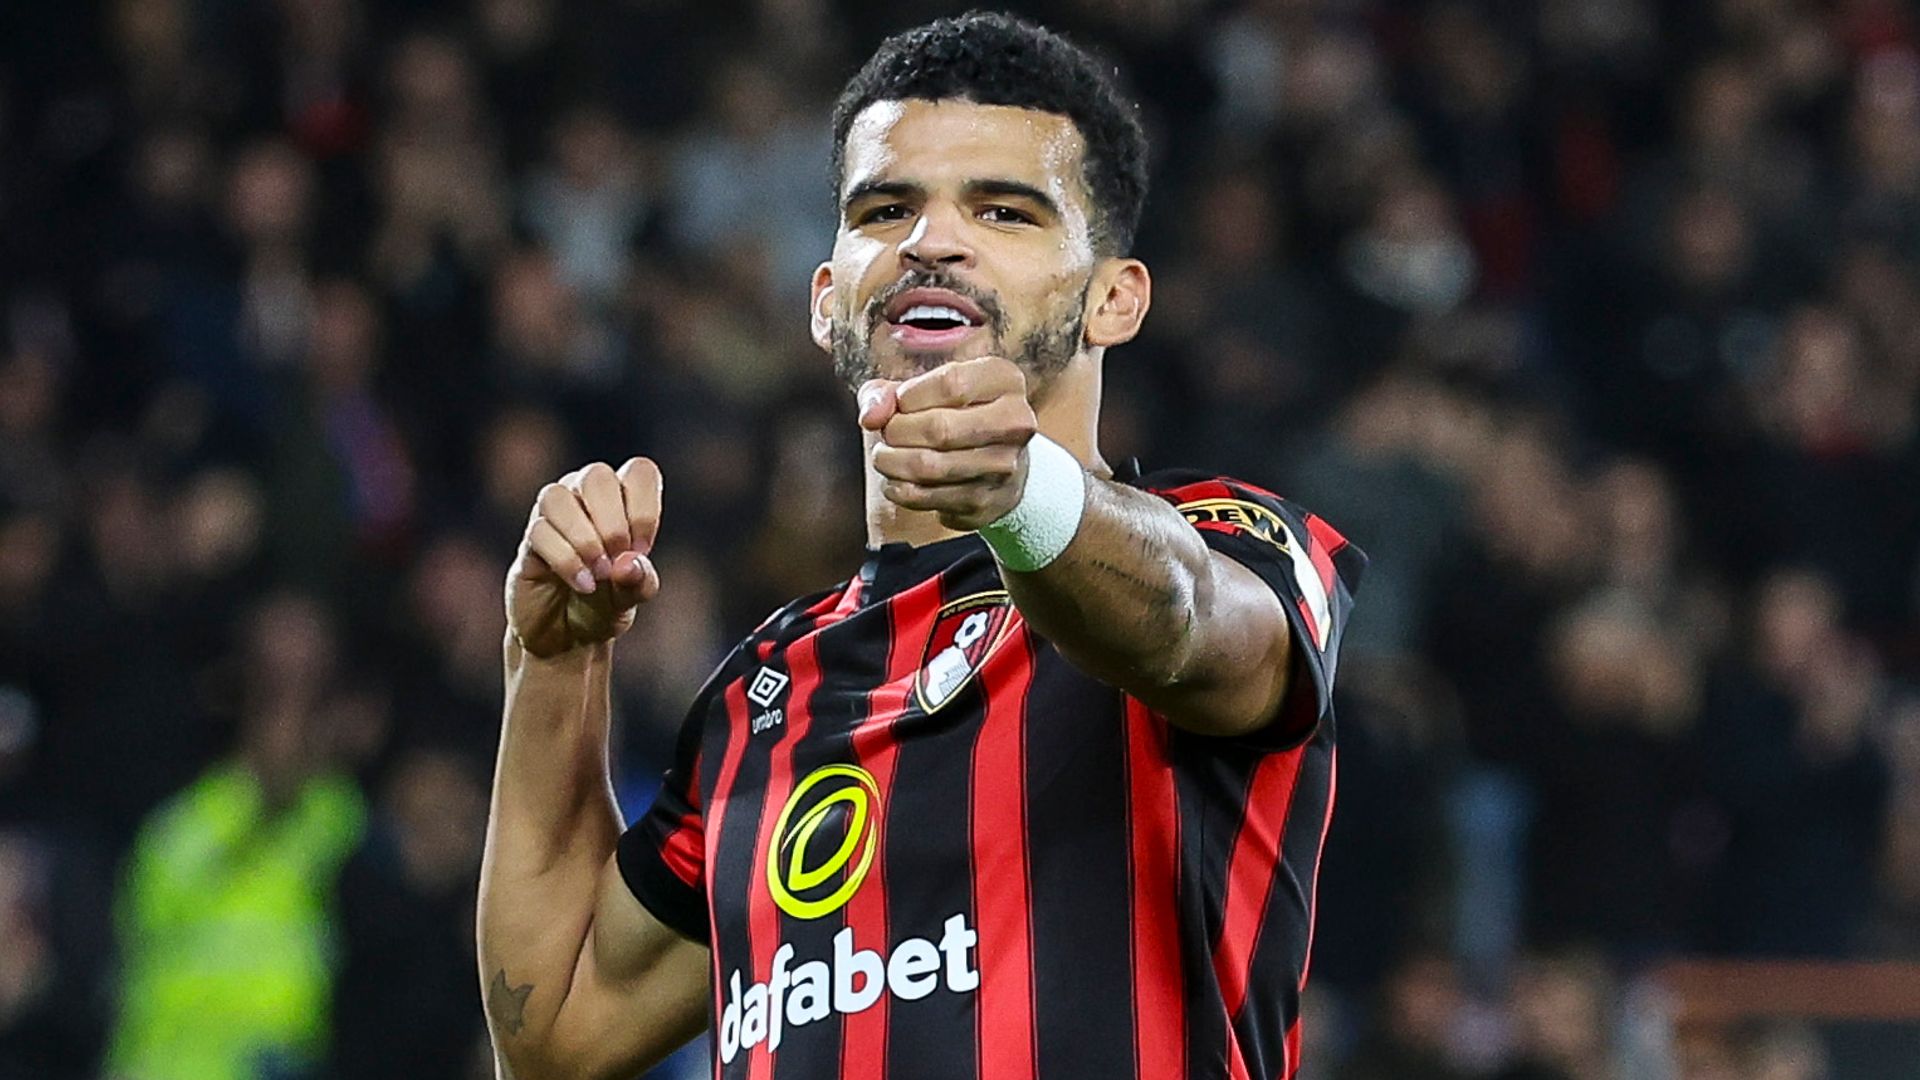 Solanke helps Bournemouth past Stoke in Carabao Cup